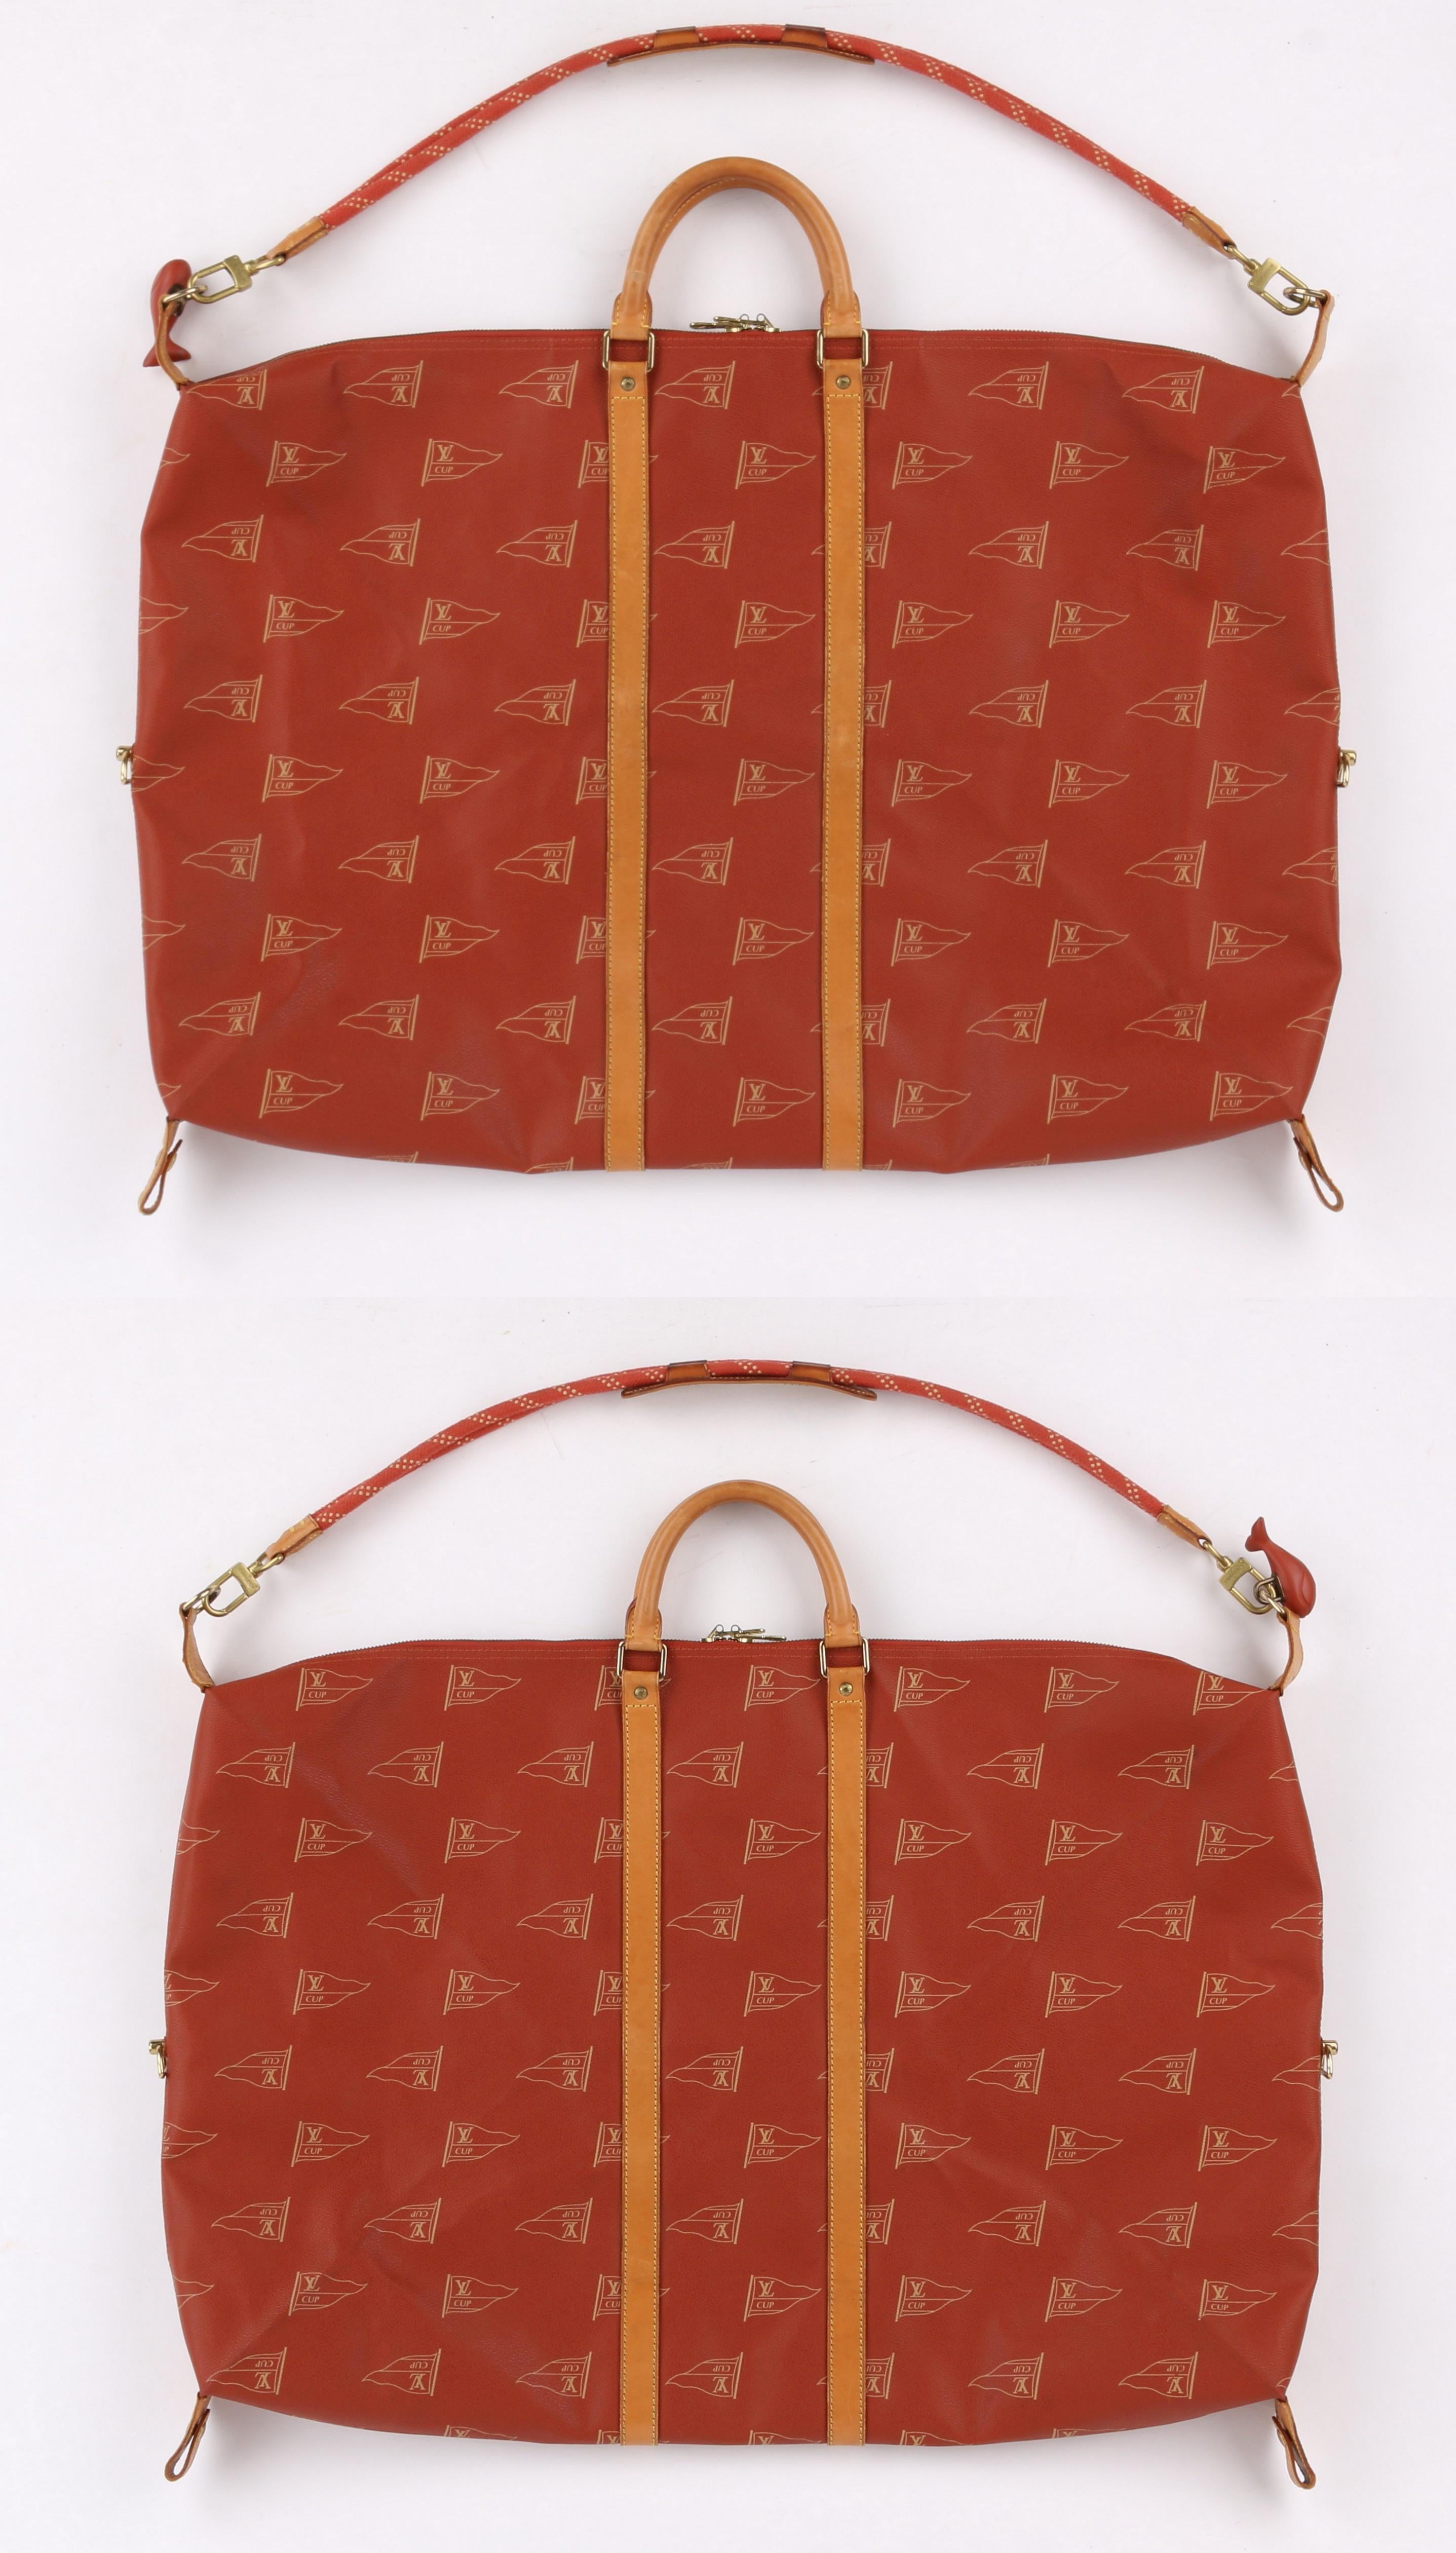 DESCRIPTION: LOUIS VUITTON c.1995 LV America's Cup Garment Duffel Bag w/ Whale Lock Ltd Ed
 
Circa: c.1995 
Label(s): Louis Vuitton 
Designer: 
Style: Garment / Duffel bag
Color(s): Shades of red, beige, and tan leather
Lined: No
Marked Fabric